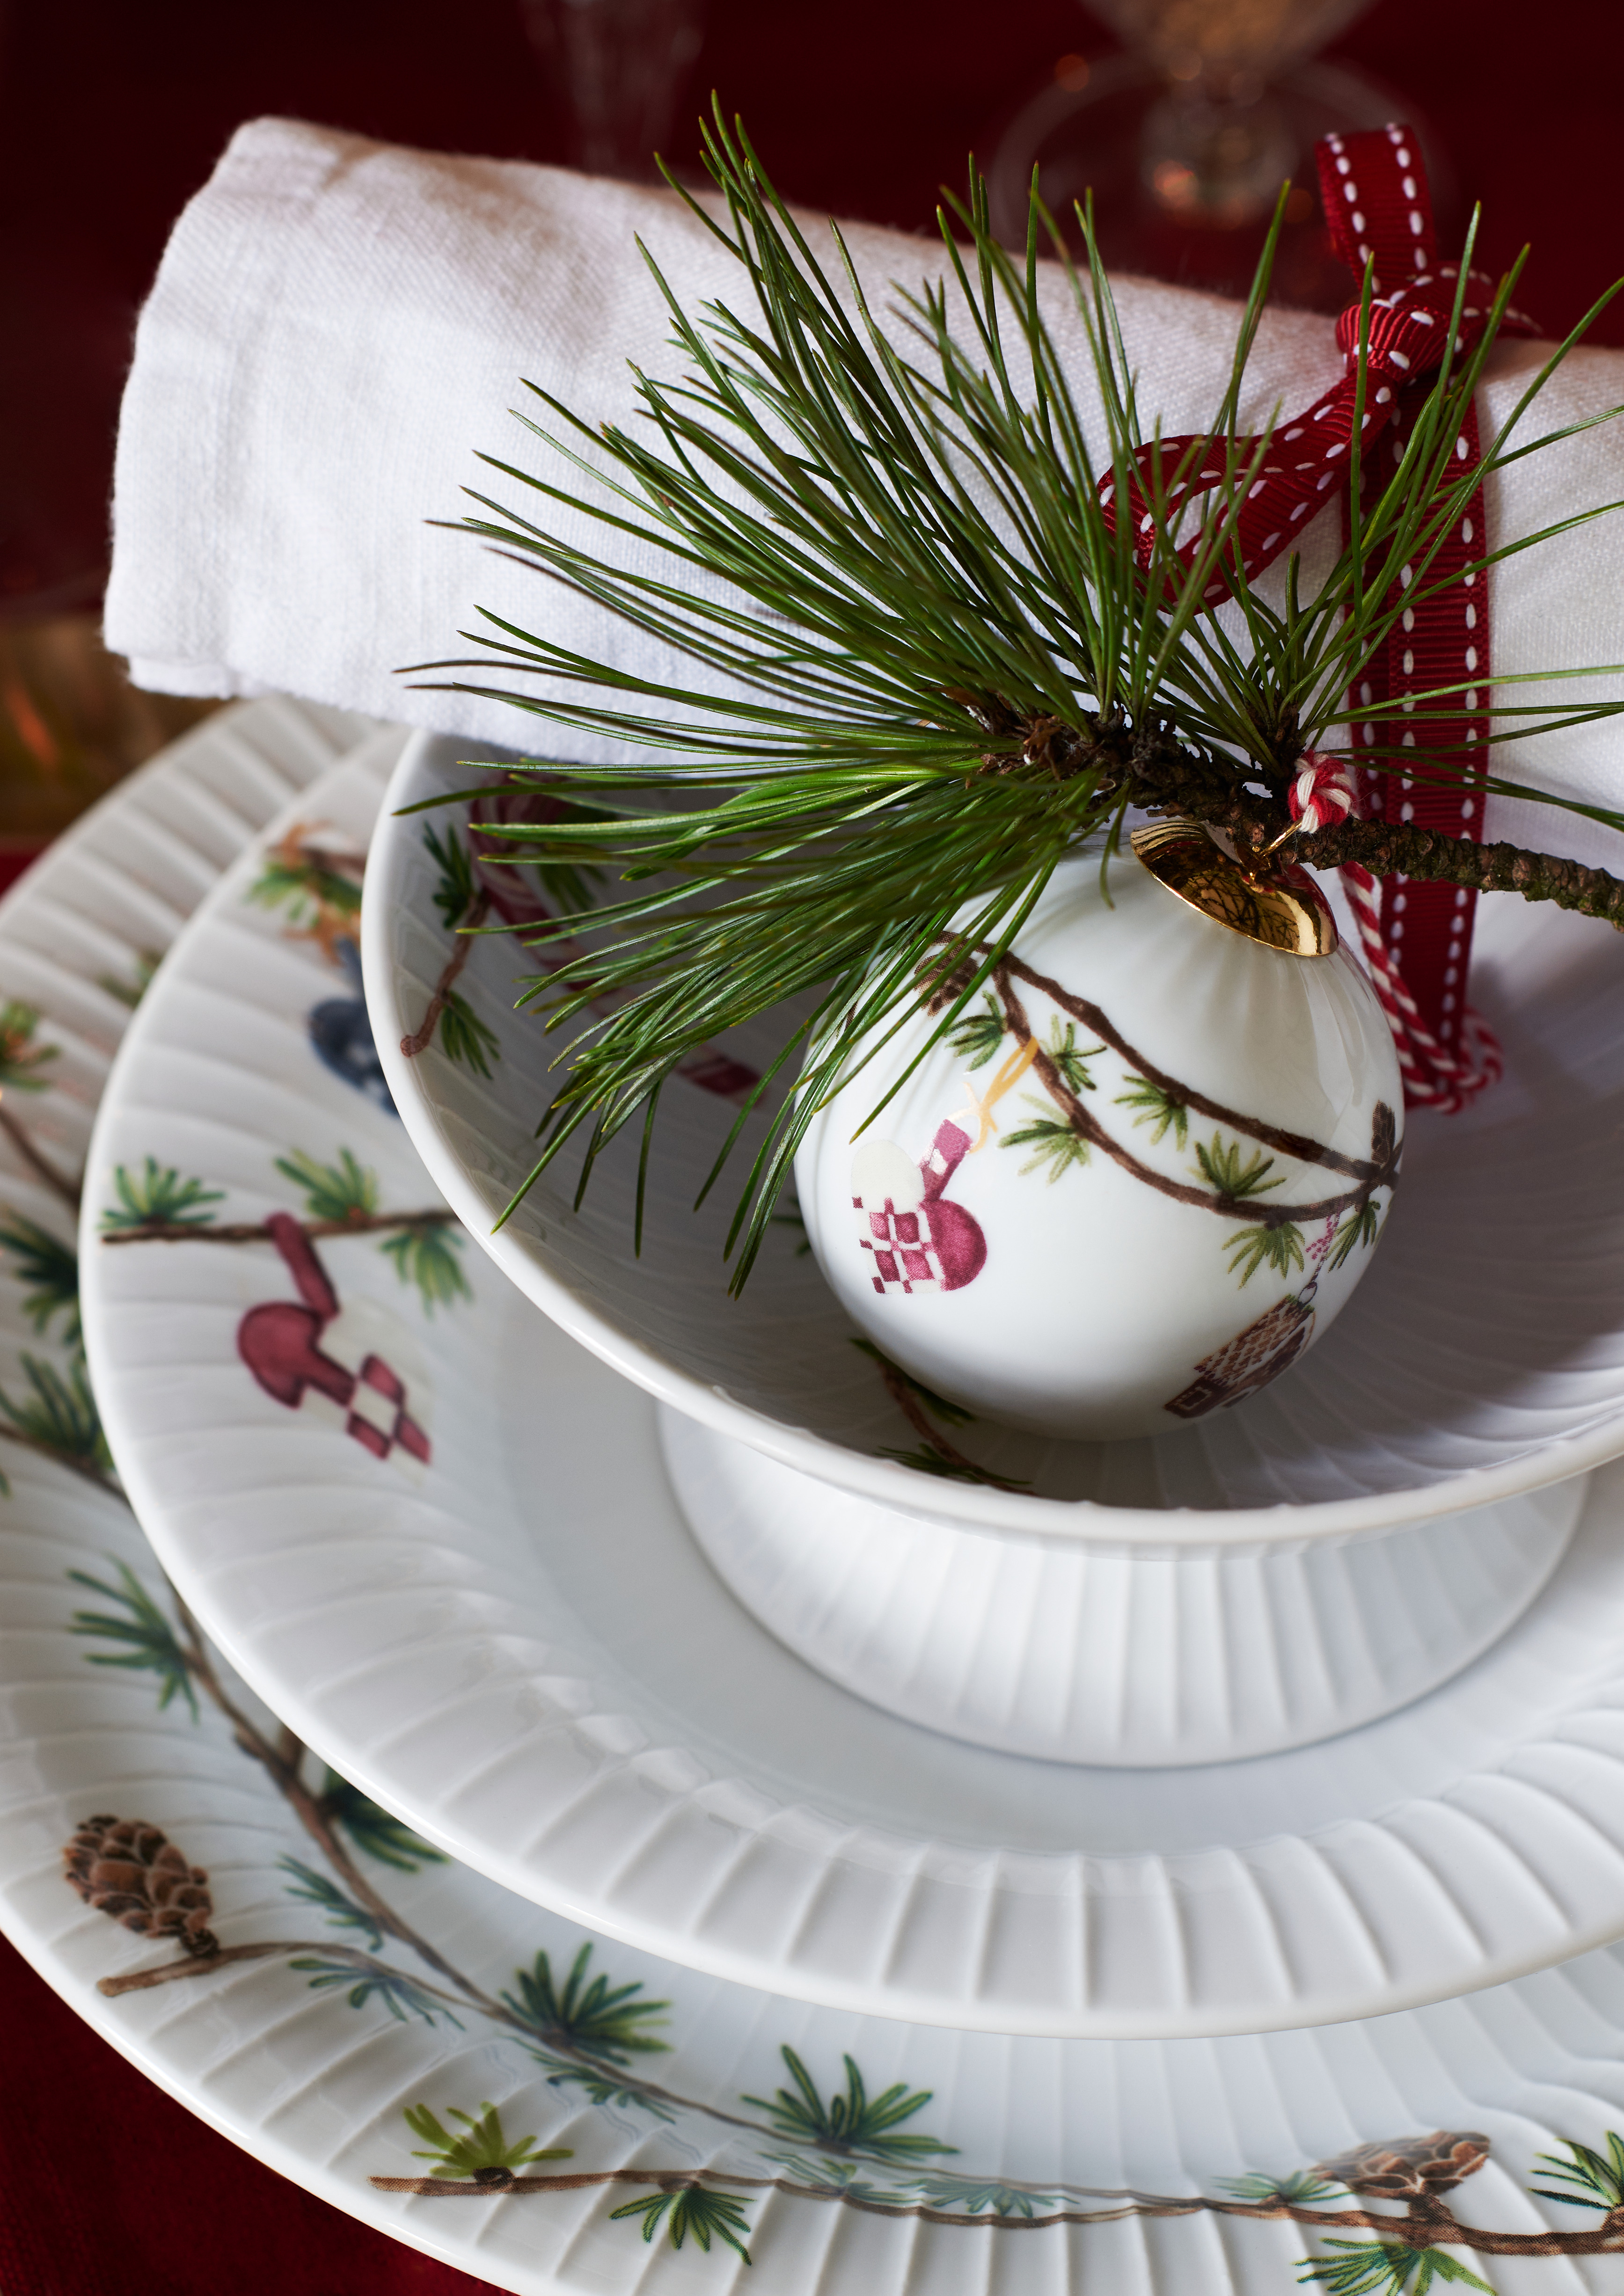 Plates with Christmas motifs from the Kähler Hammershøi Christmas series